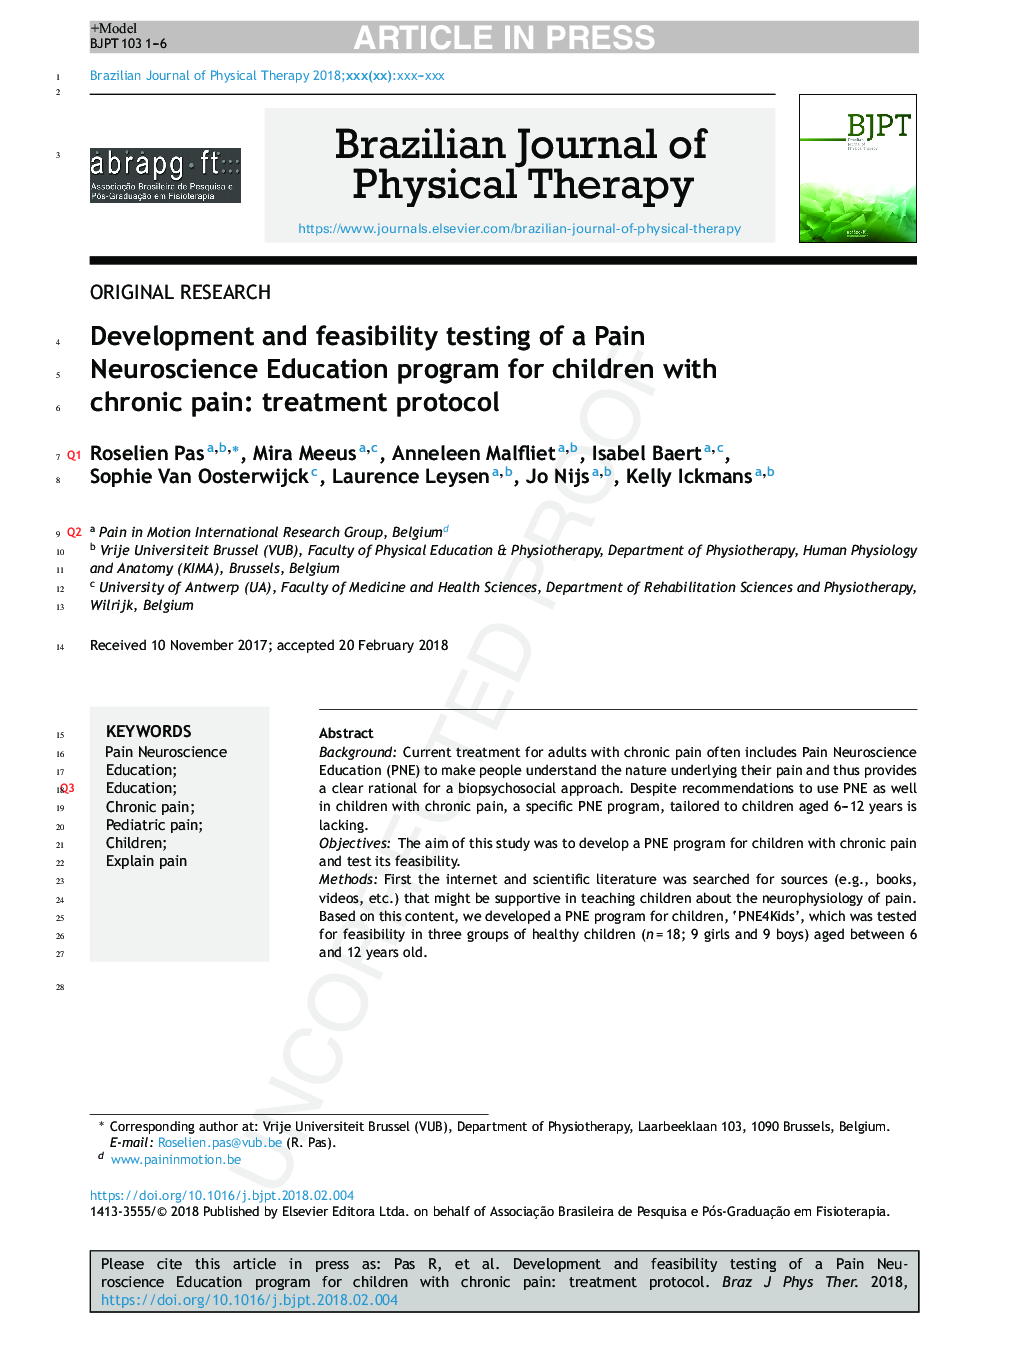 Development and feasibility testing of a Pain Neuroscience Education program for children with chronic pain: treatment protocol